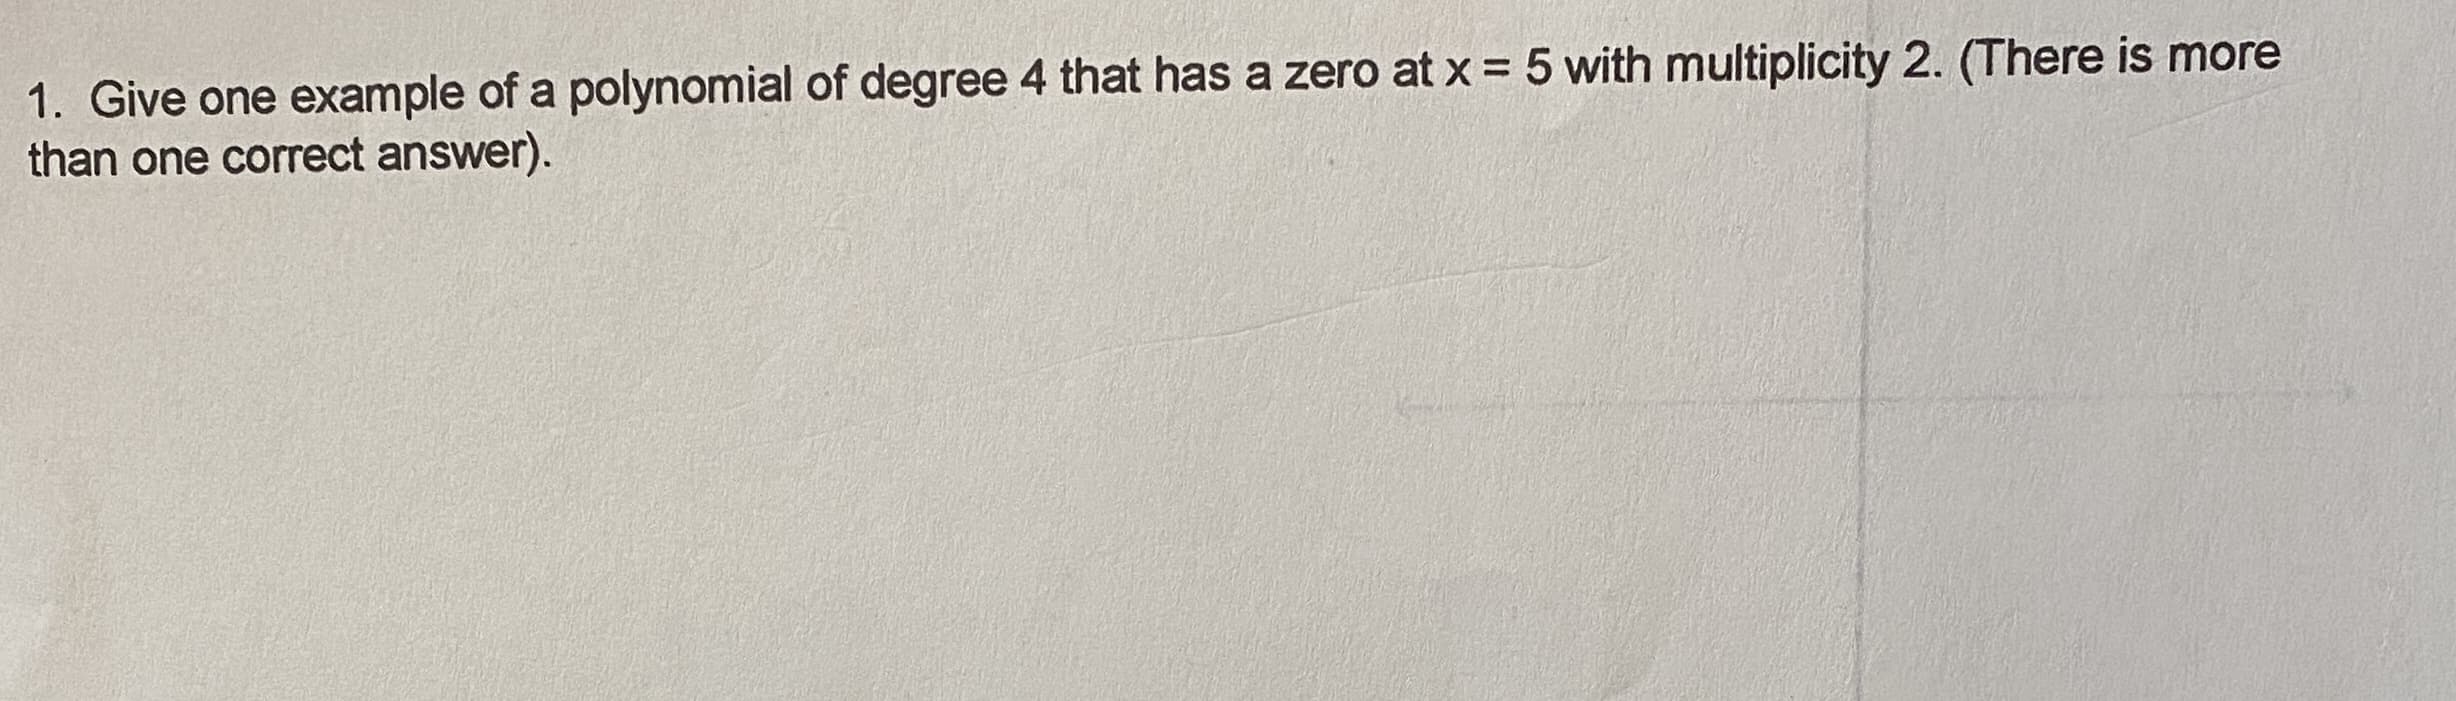 1. Give one example of a polynomial of degree 4 that has a zero at x = 5 with multiplicity 2. (There is more
than one correct answer).
